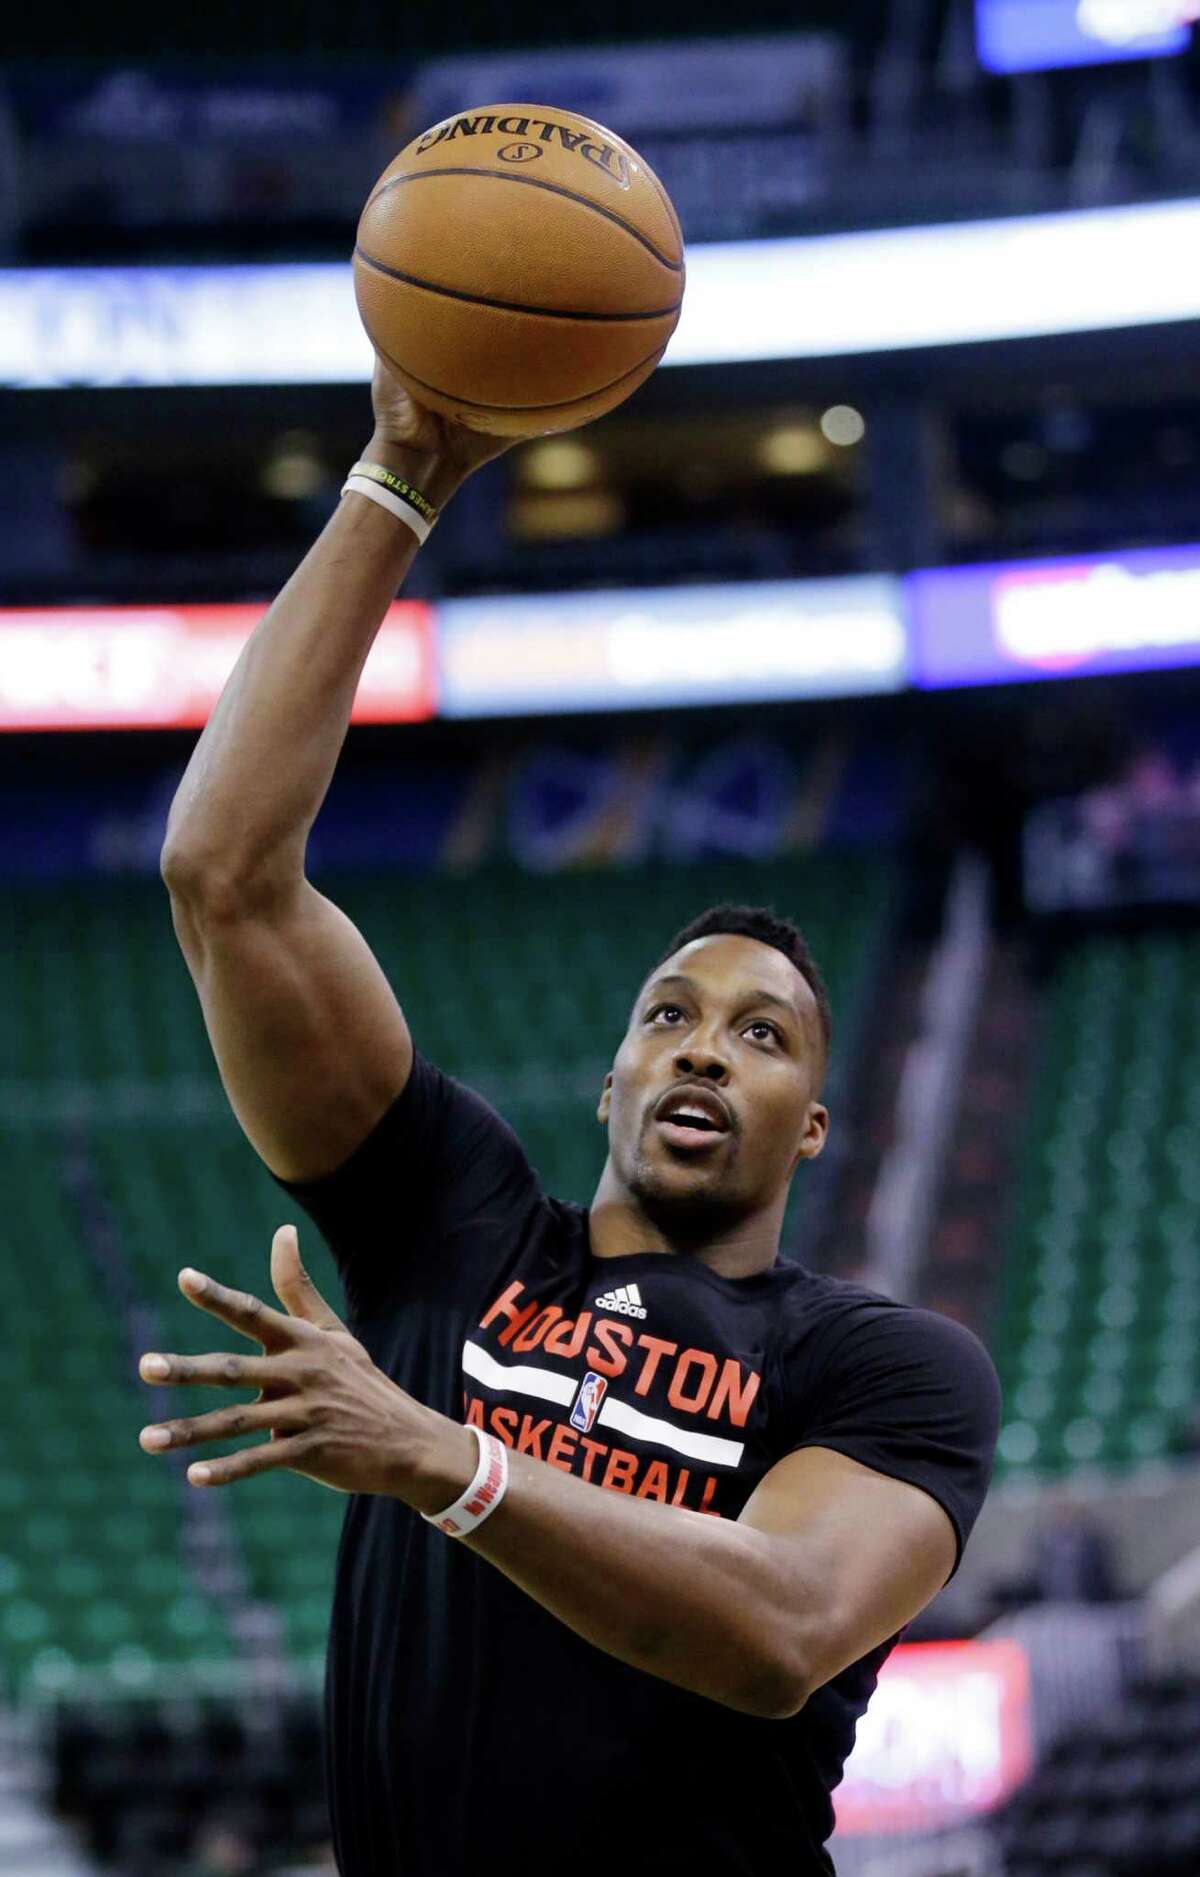 Houston Rockets center Dwight Howard shoots during practice before the start of their NBA basketball game against the Utah Jazz Tuesday, Feb. 23, 2016, in Salt Lake City. (AP Photo/Rick Bowmer)